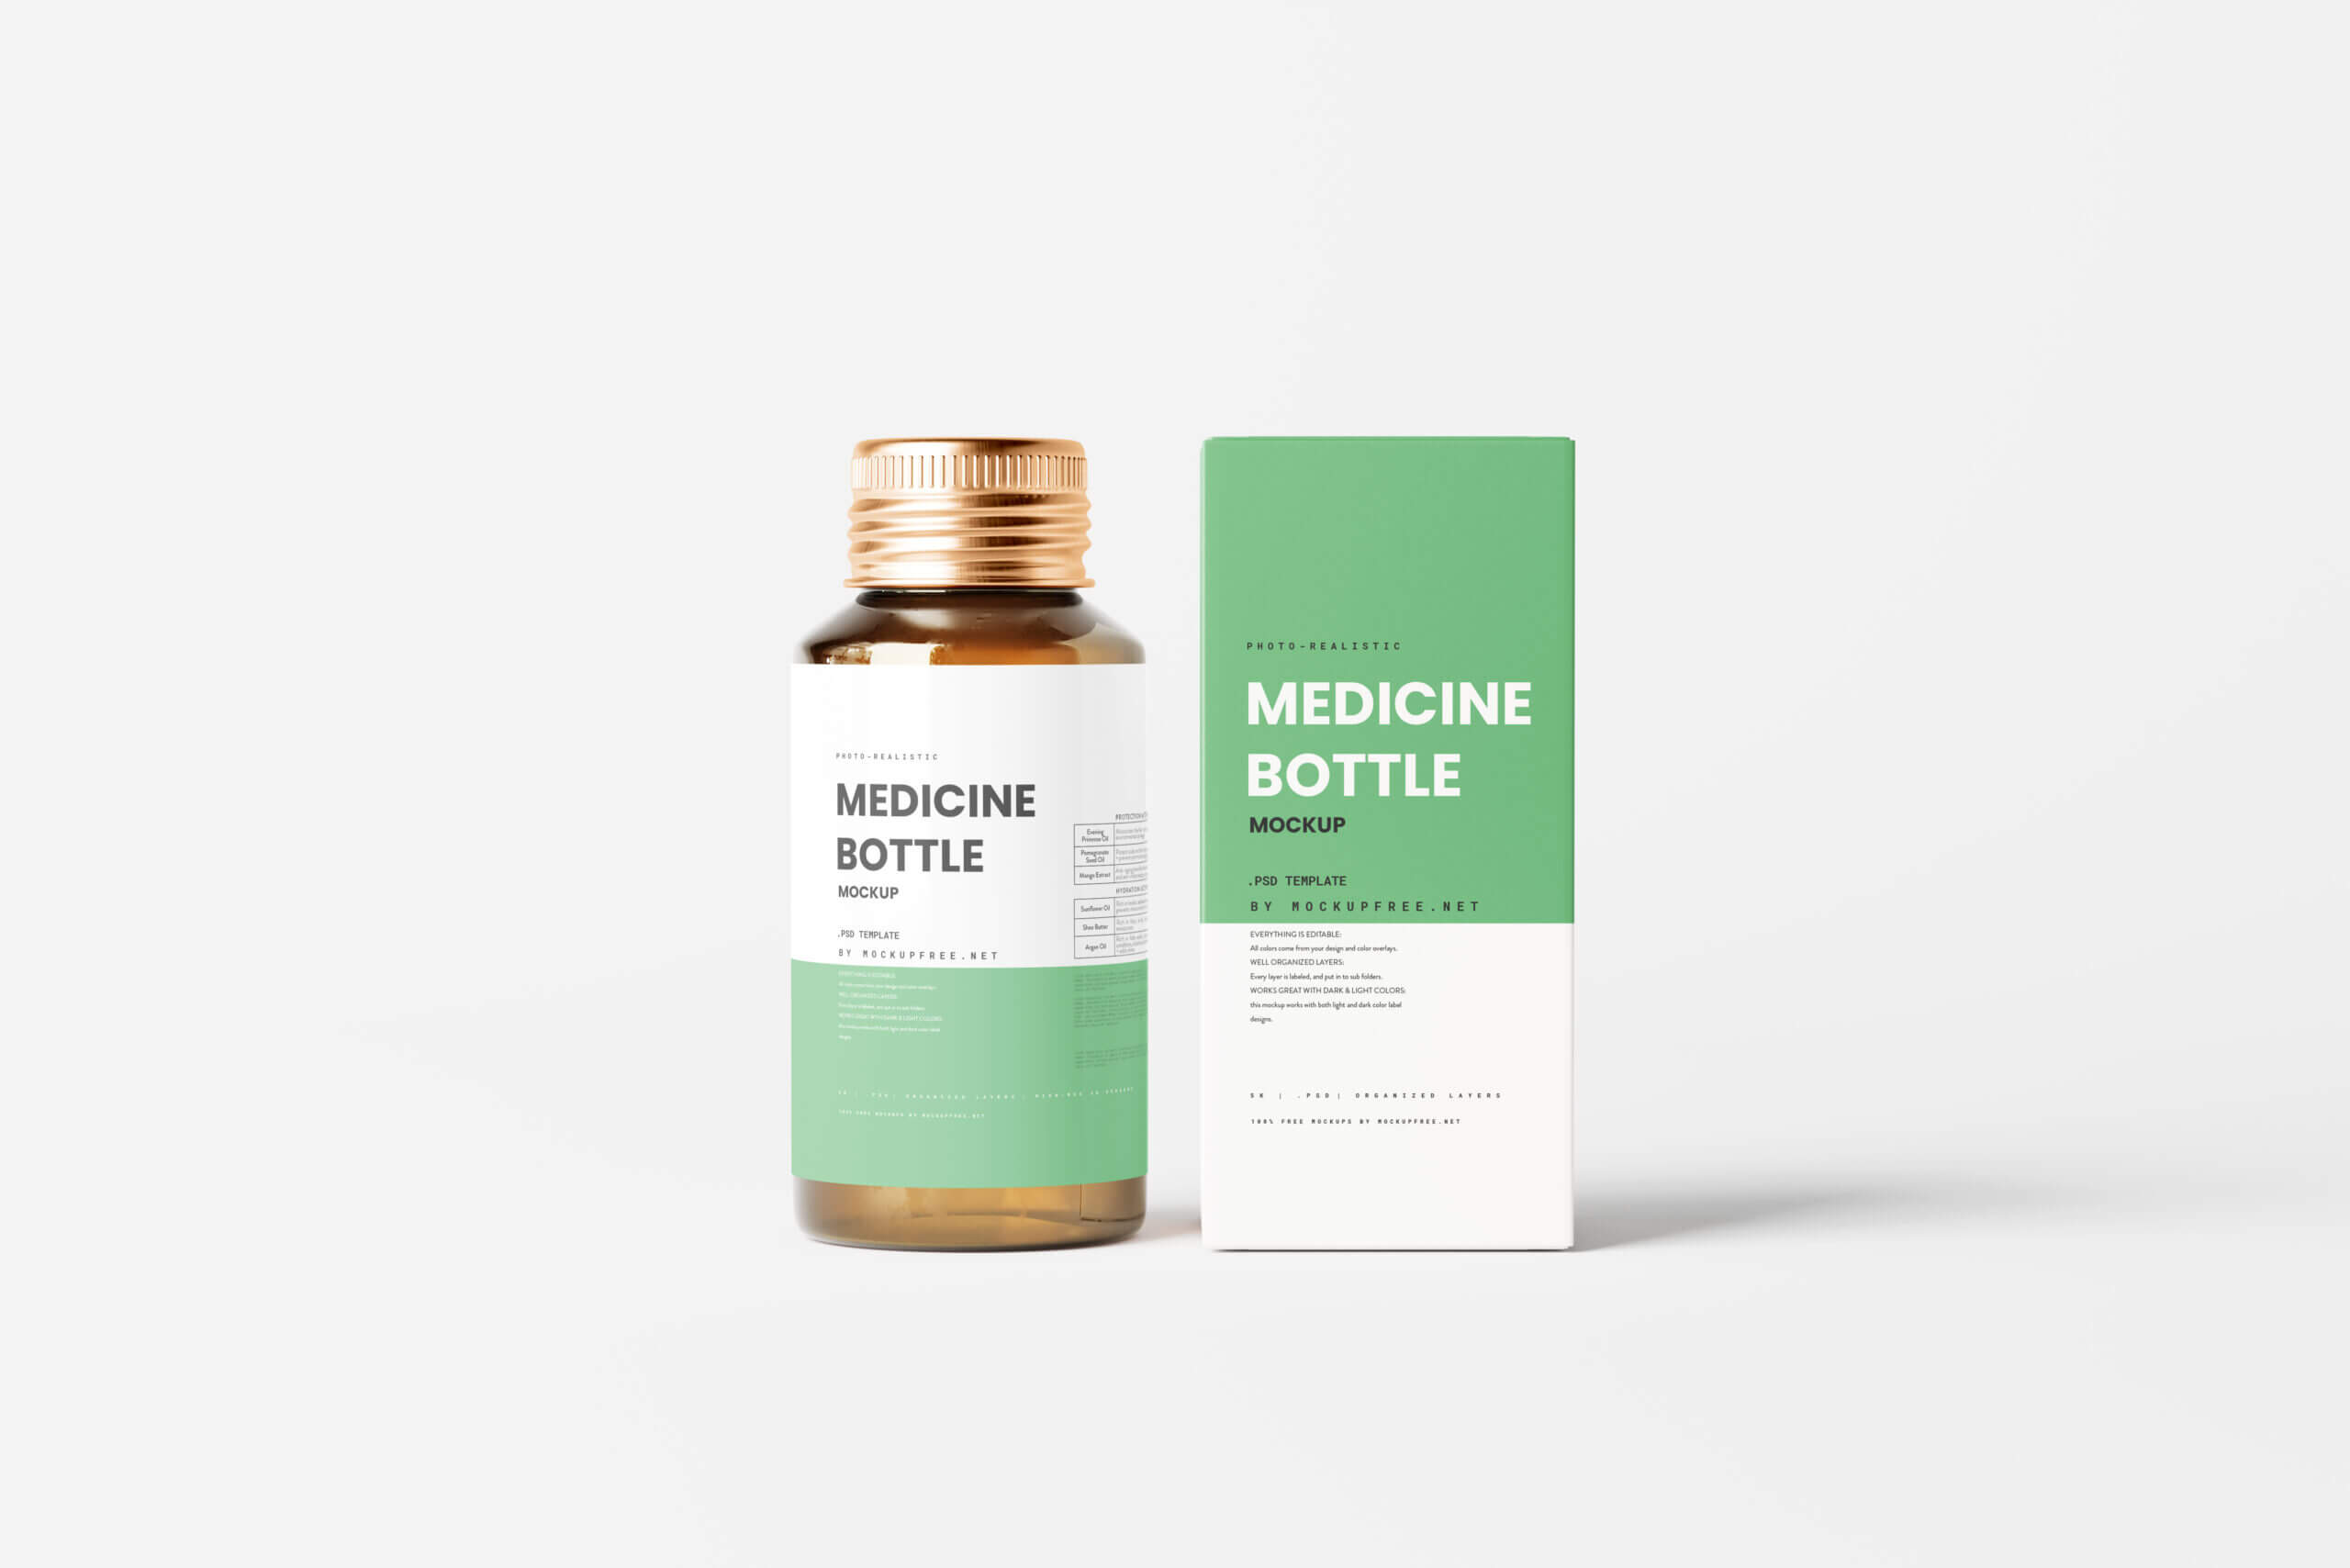 10 Free Amber Medicine Bottle With Box Mockup PSD Files5